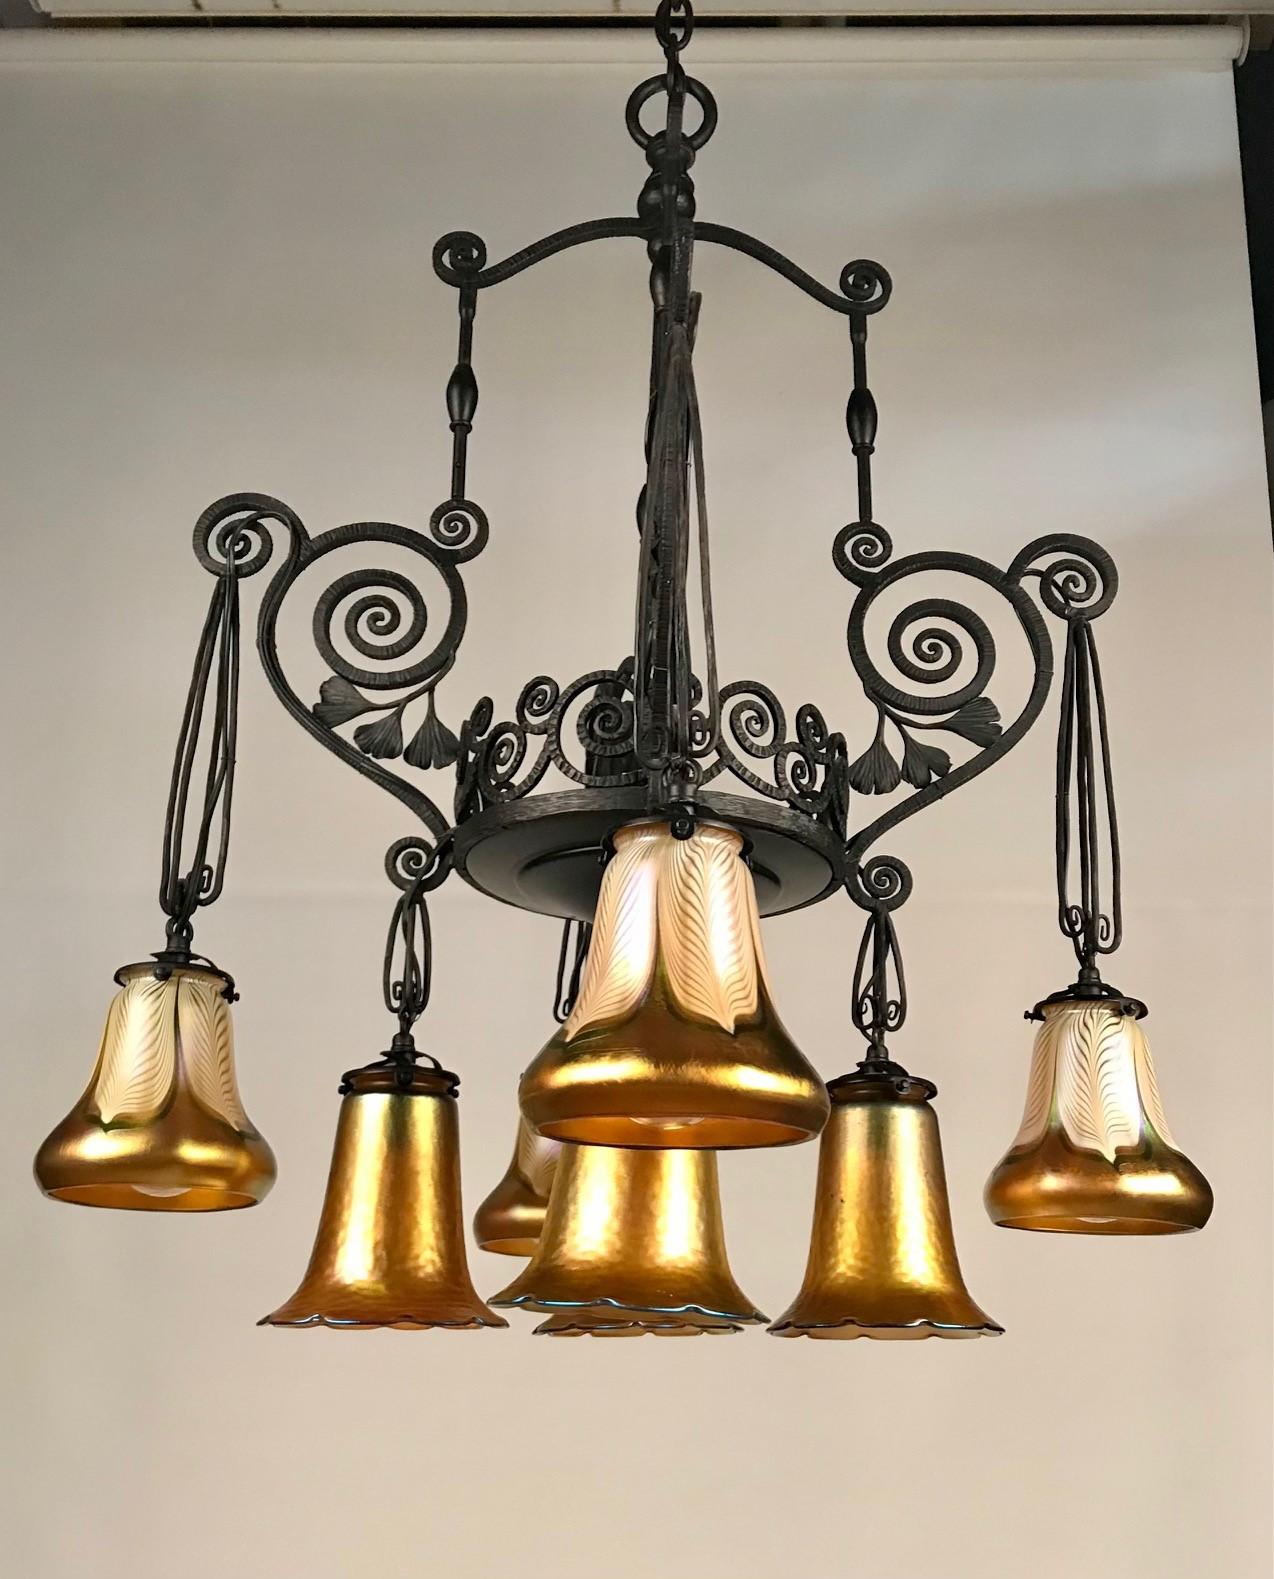 This elegant chandelier combines the vigor of hand-hammered wrought iron with the stylish iridescence of Quezal shades. The scrolling and leafy frame hangs from its original chain and canopy and supports four Aurene shades beneath four Pulled